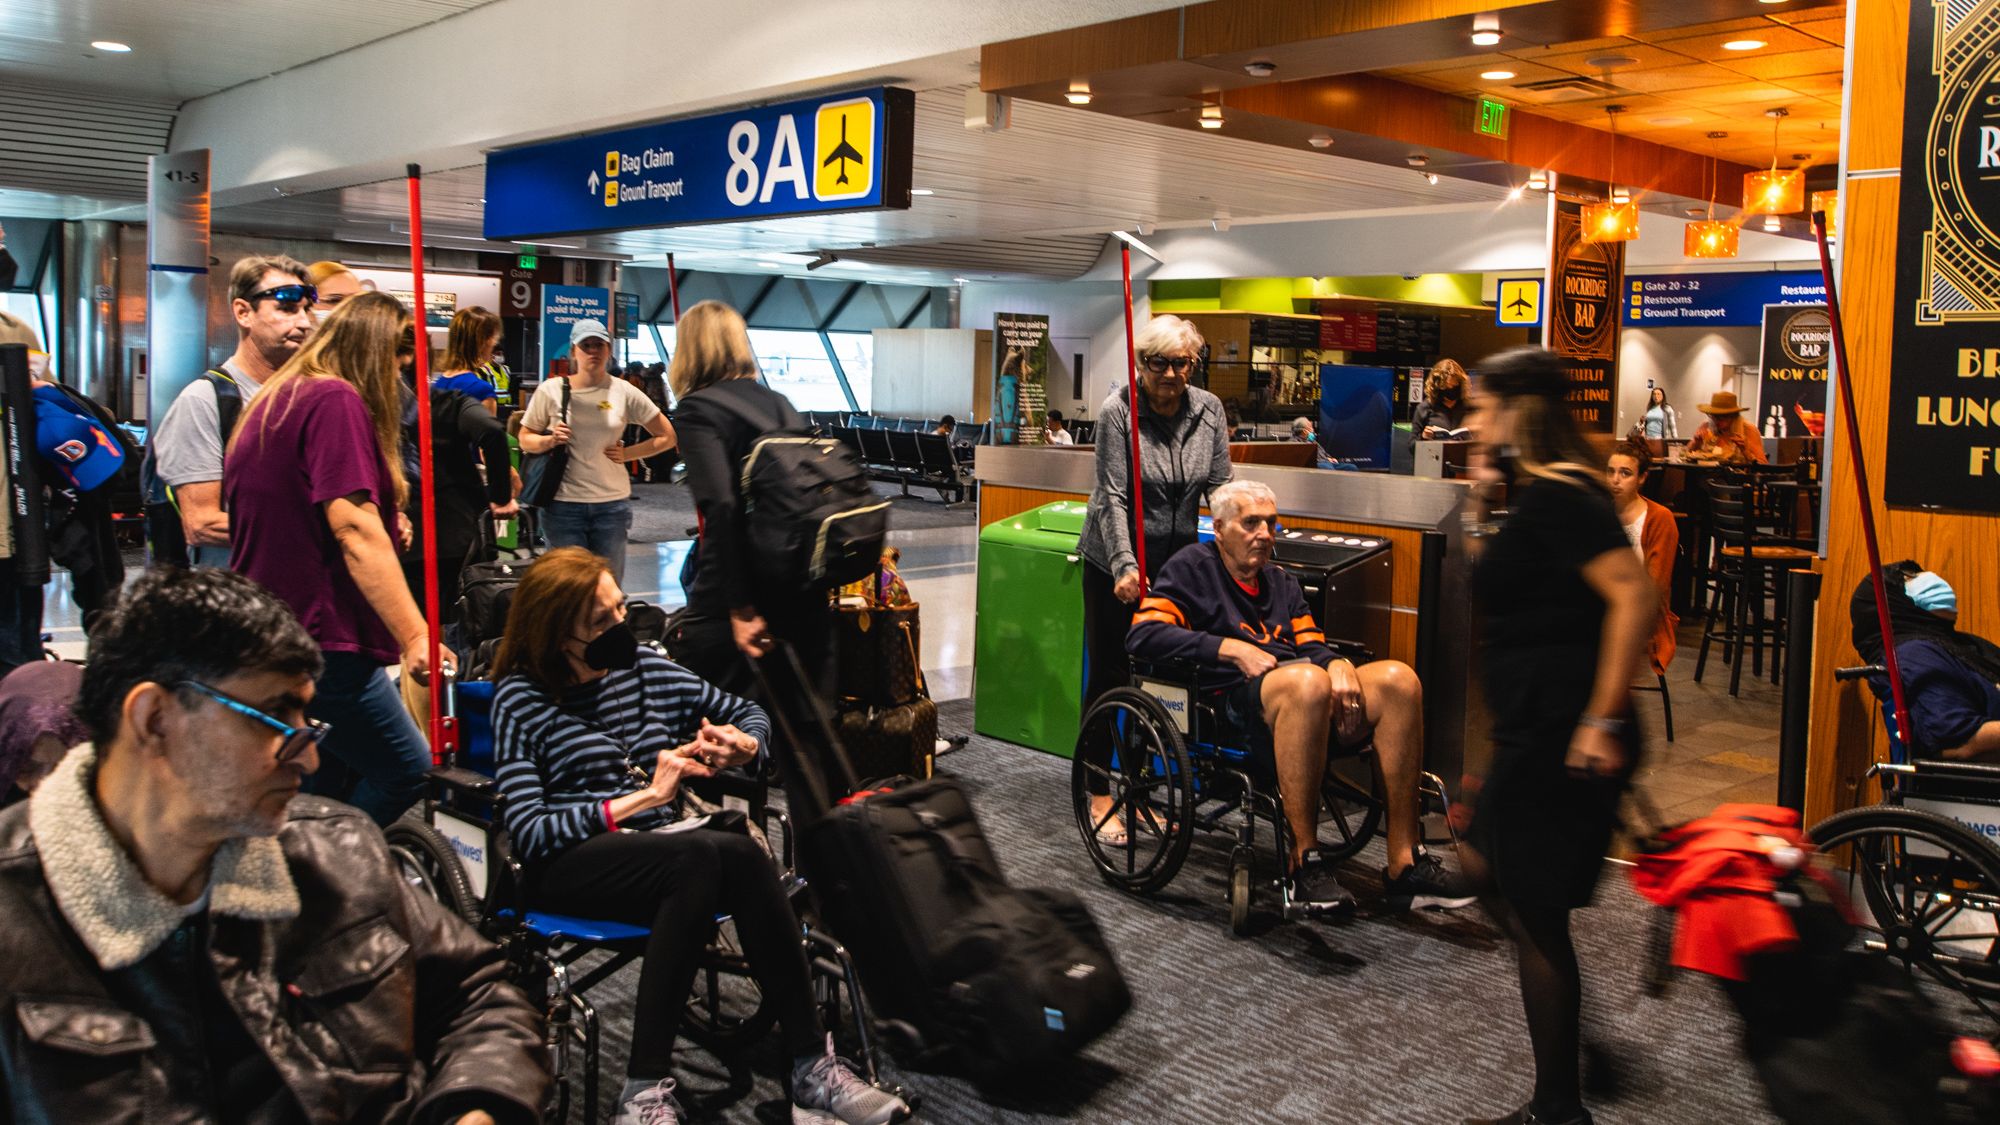 Busy Oakland Airport Gate 8A - A Southwest Airlines Gate With Wheelchairs